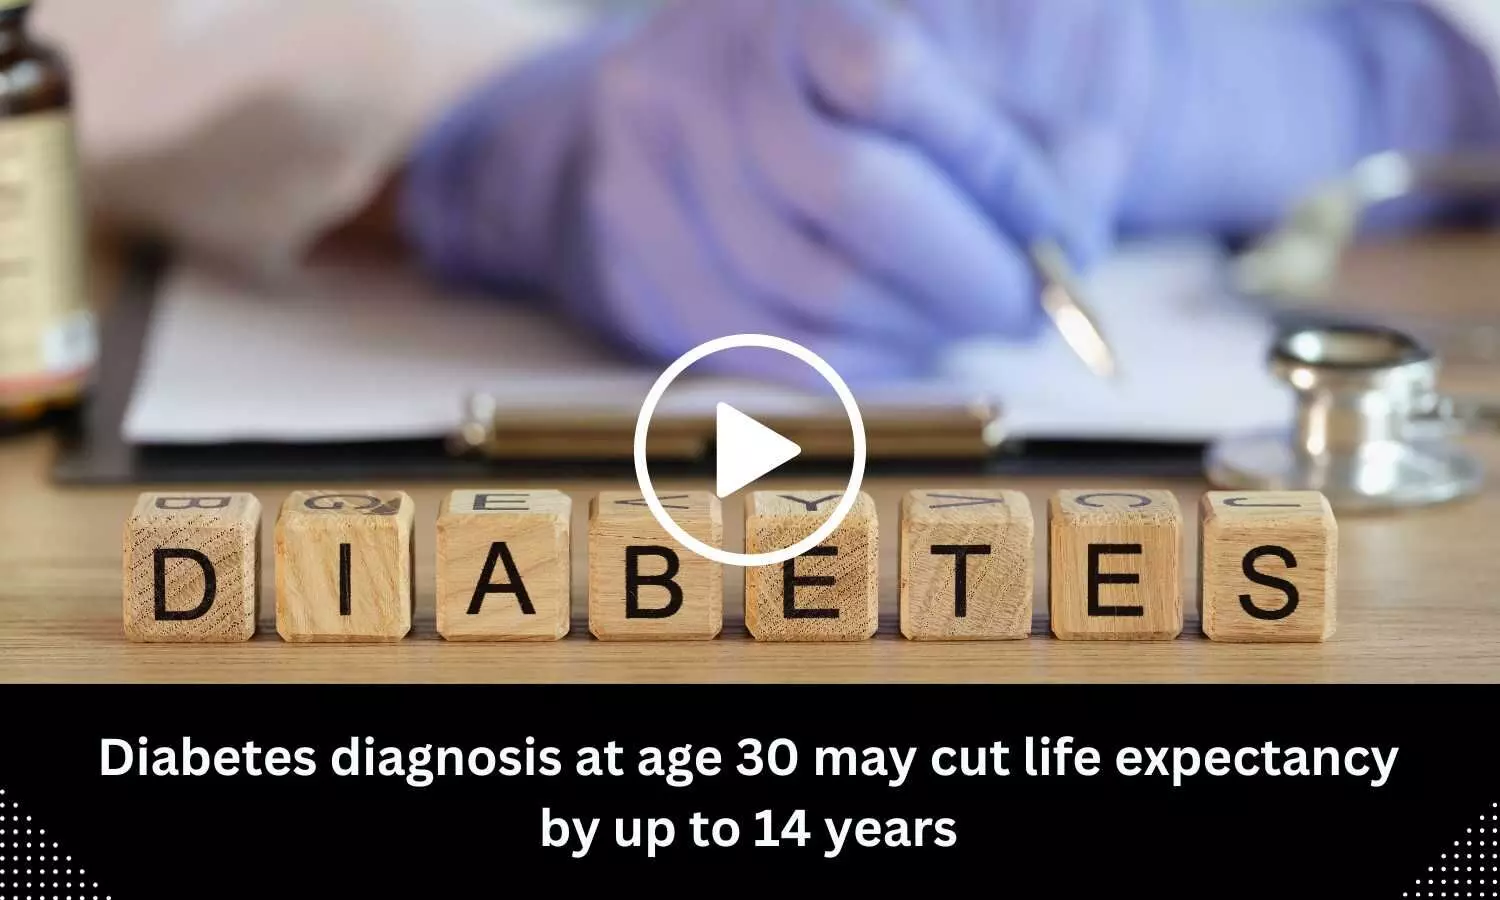 Diabetes diagnosis at age 30 may cut life expectancy by up to 14 years